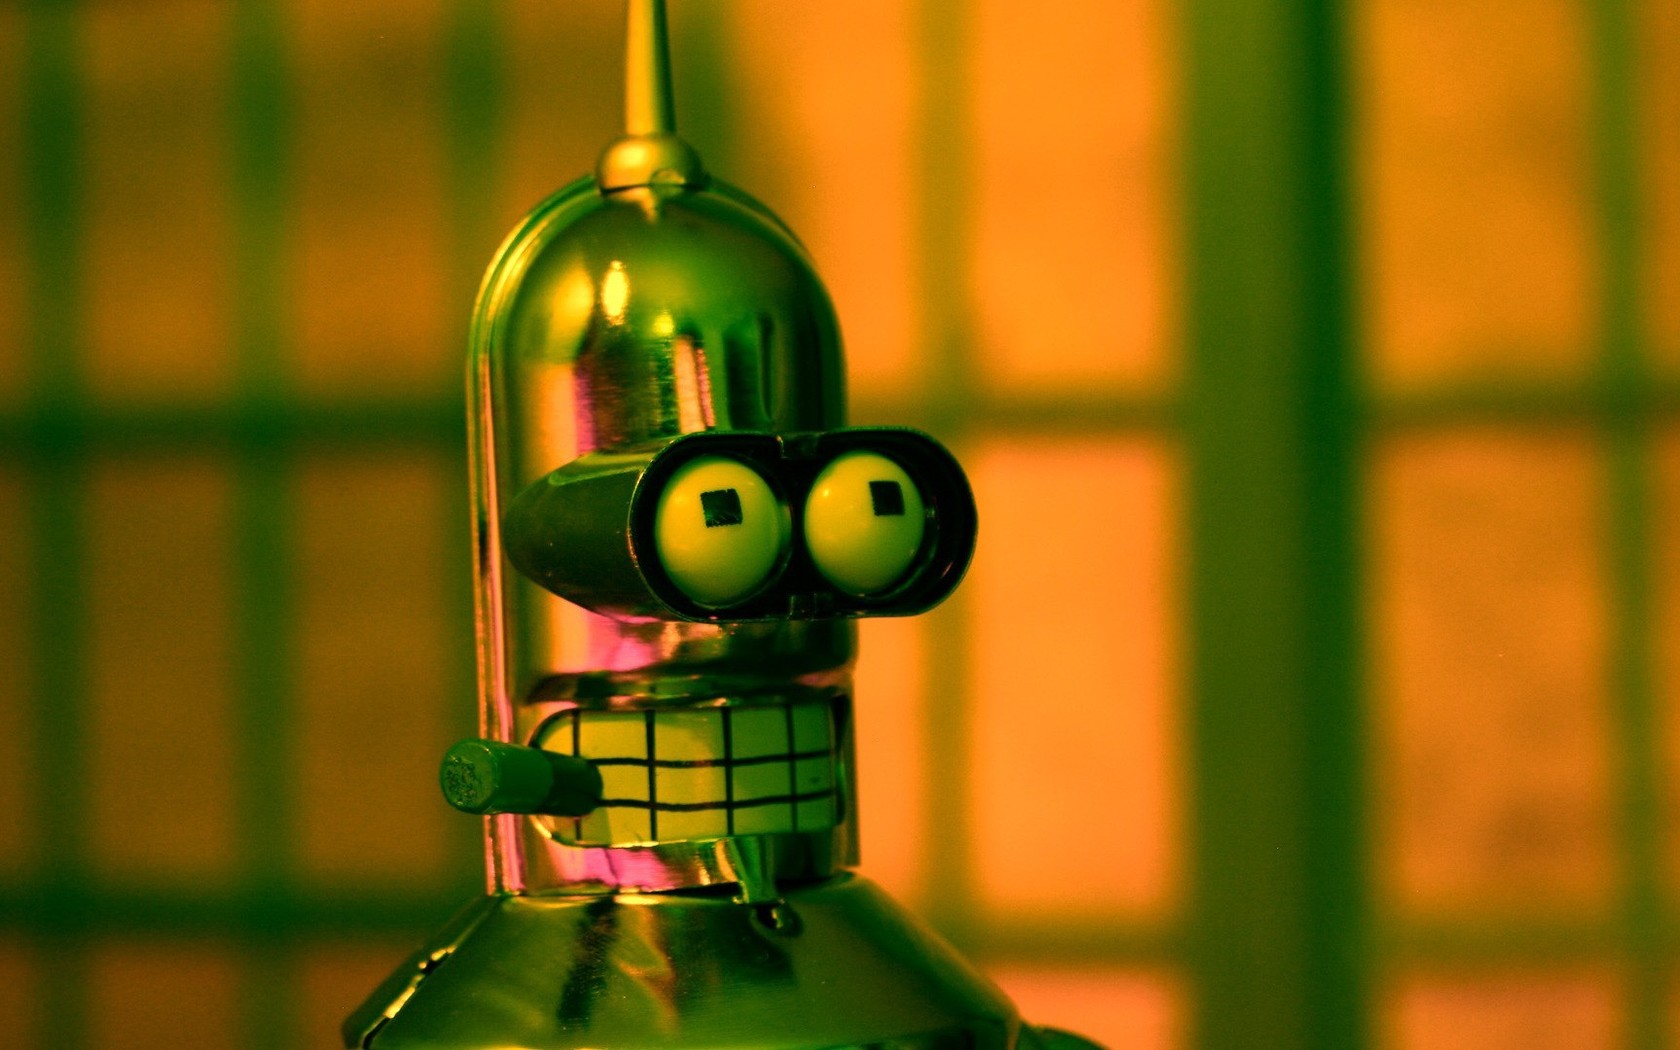 Related Pictures Ics Funny Futurama Bender